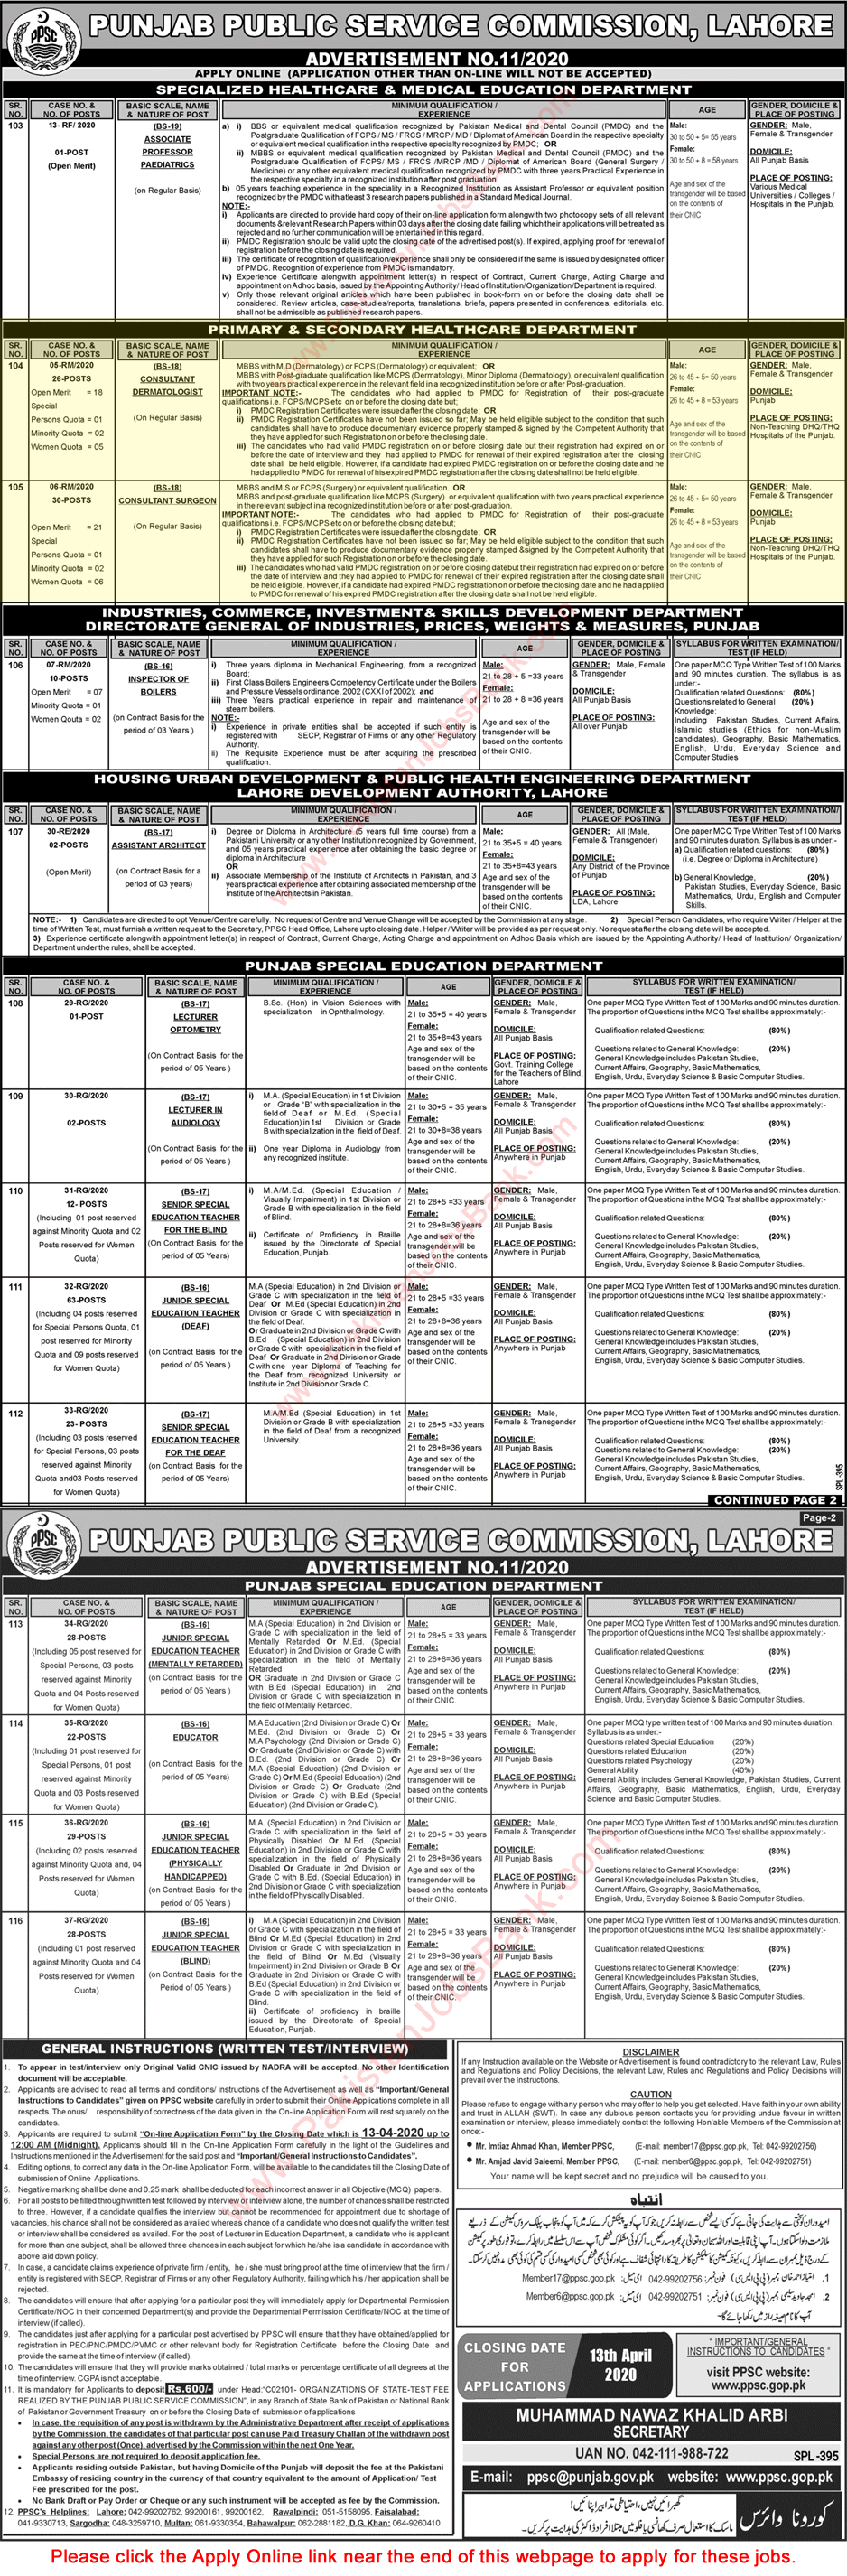 Specialist Doctor Jobs in Primary and Secondary Healthcare Department Punjab 2020 March PPSC Online Apply Latest